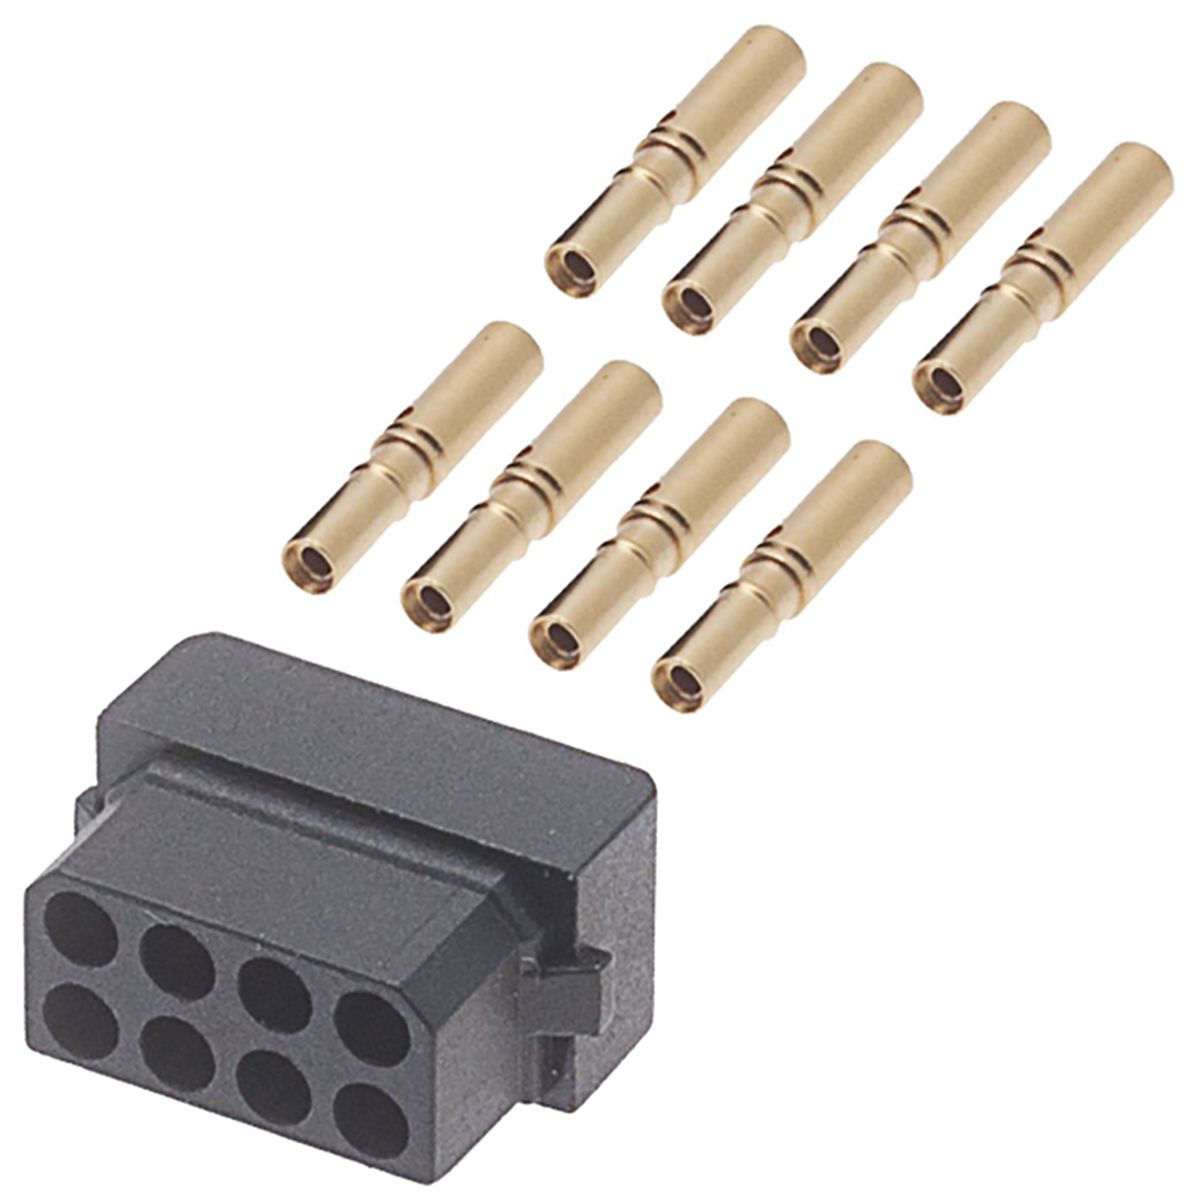 Datamate Connector Kit Containing 8 way DIL Female Shell, Crimps